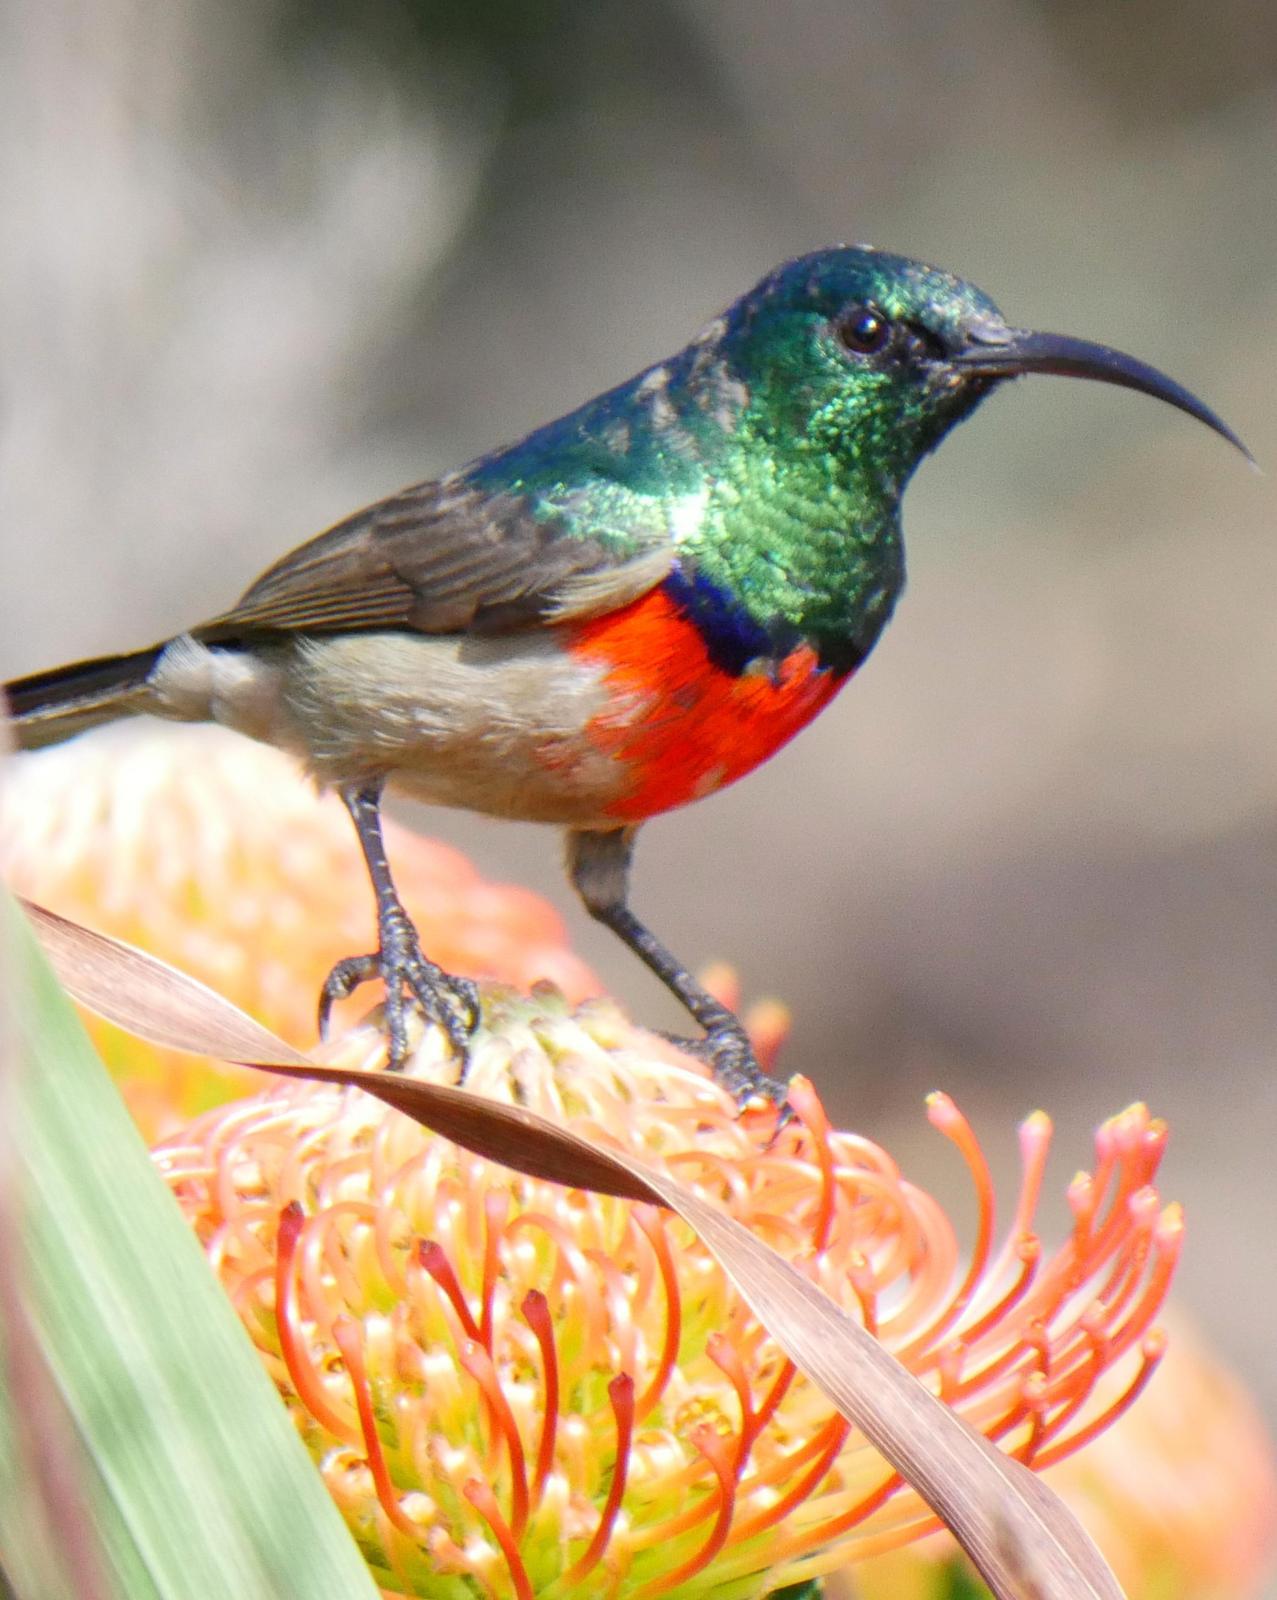 Greater Double-collared Sunbird Photo by Peter Lowe